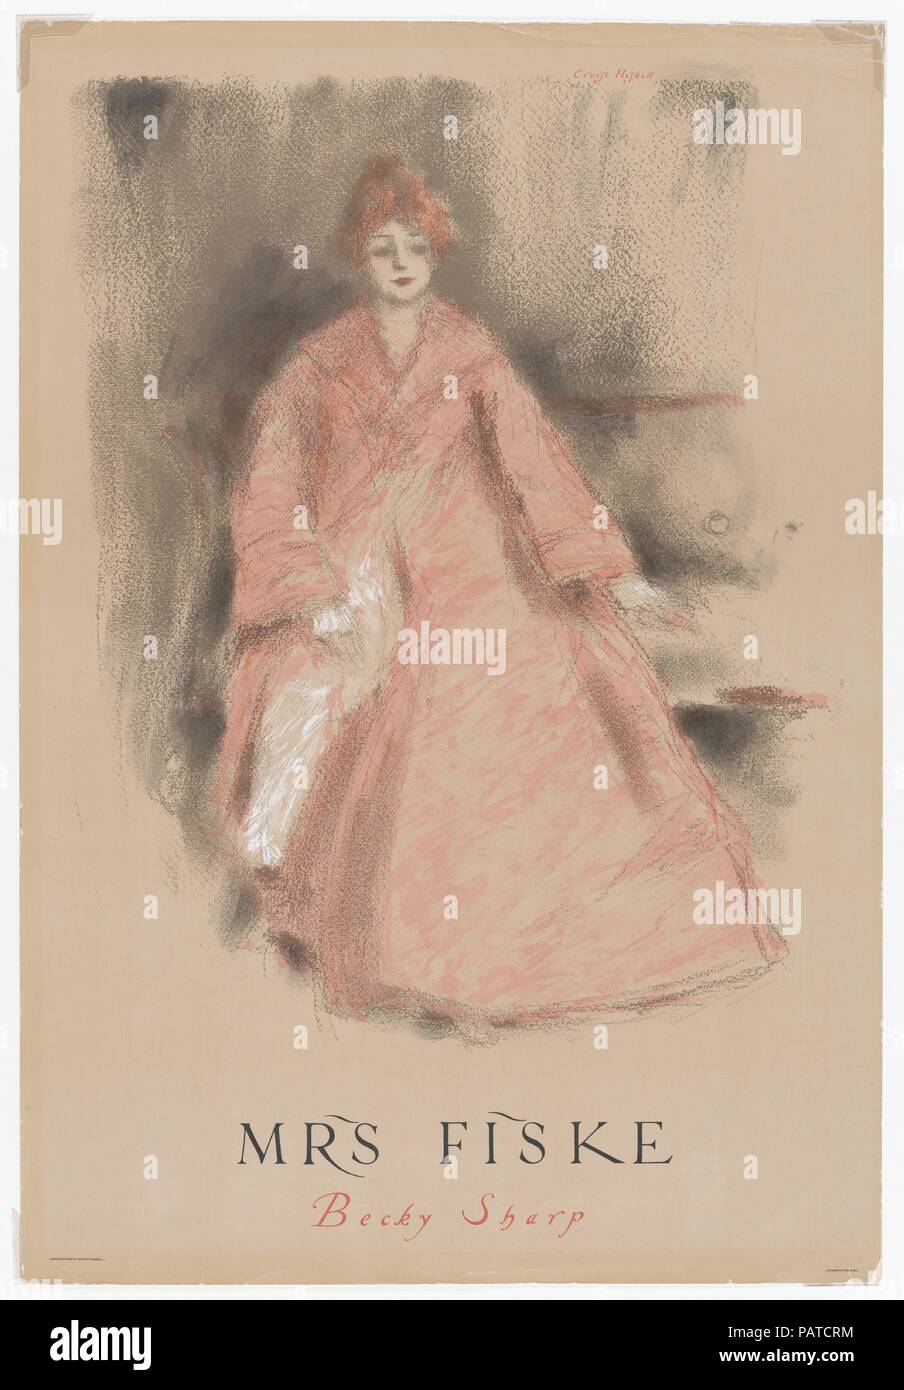 Mme Fiske, Becky Sharp. Artiste : Ernest Haskell (American, Woodstock, New York 1876-1925 West Point, Maine). Fiche Technique : Dimensions : 22 × 15 in. (55,9 × 38,1 cm). Date : 1899. Musée : Metropolitan Museum of Art, New York, USA. Banque D'Images